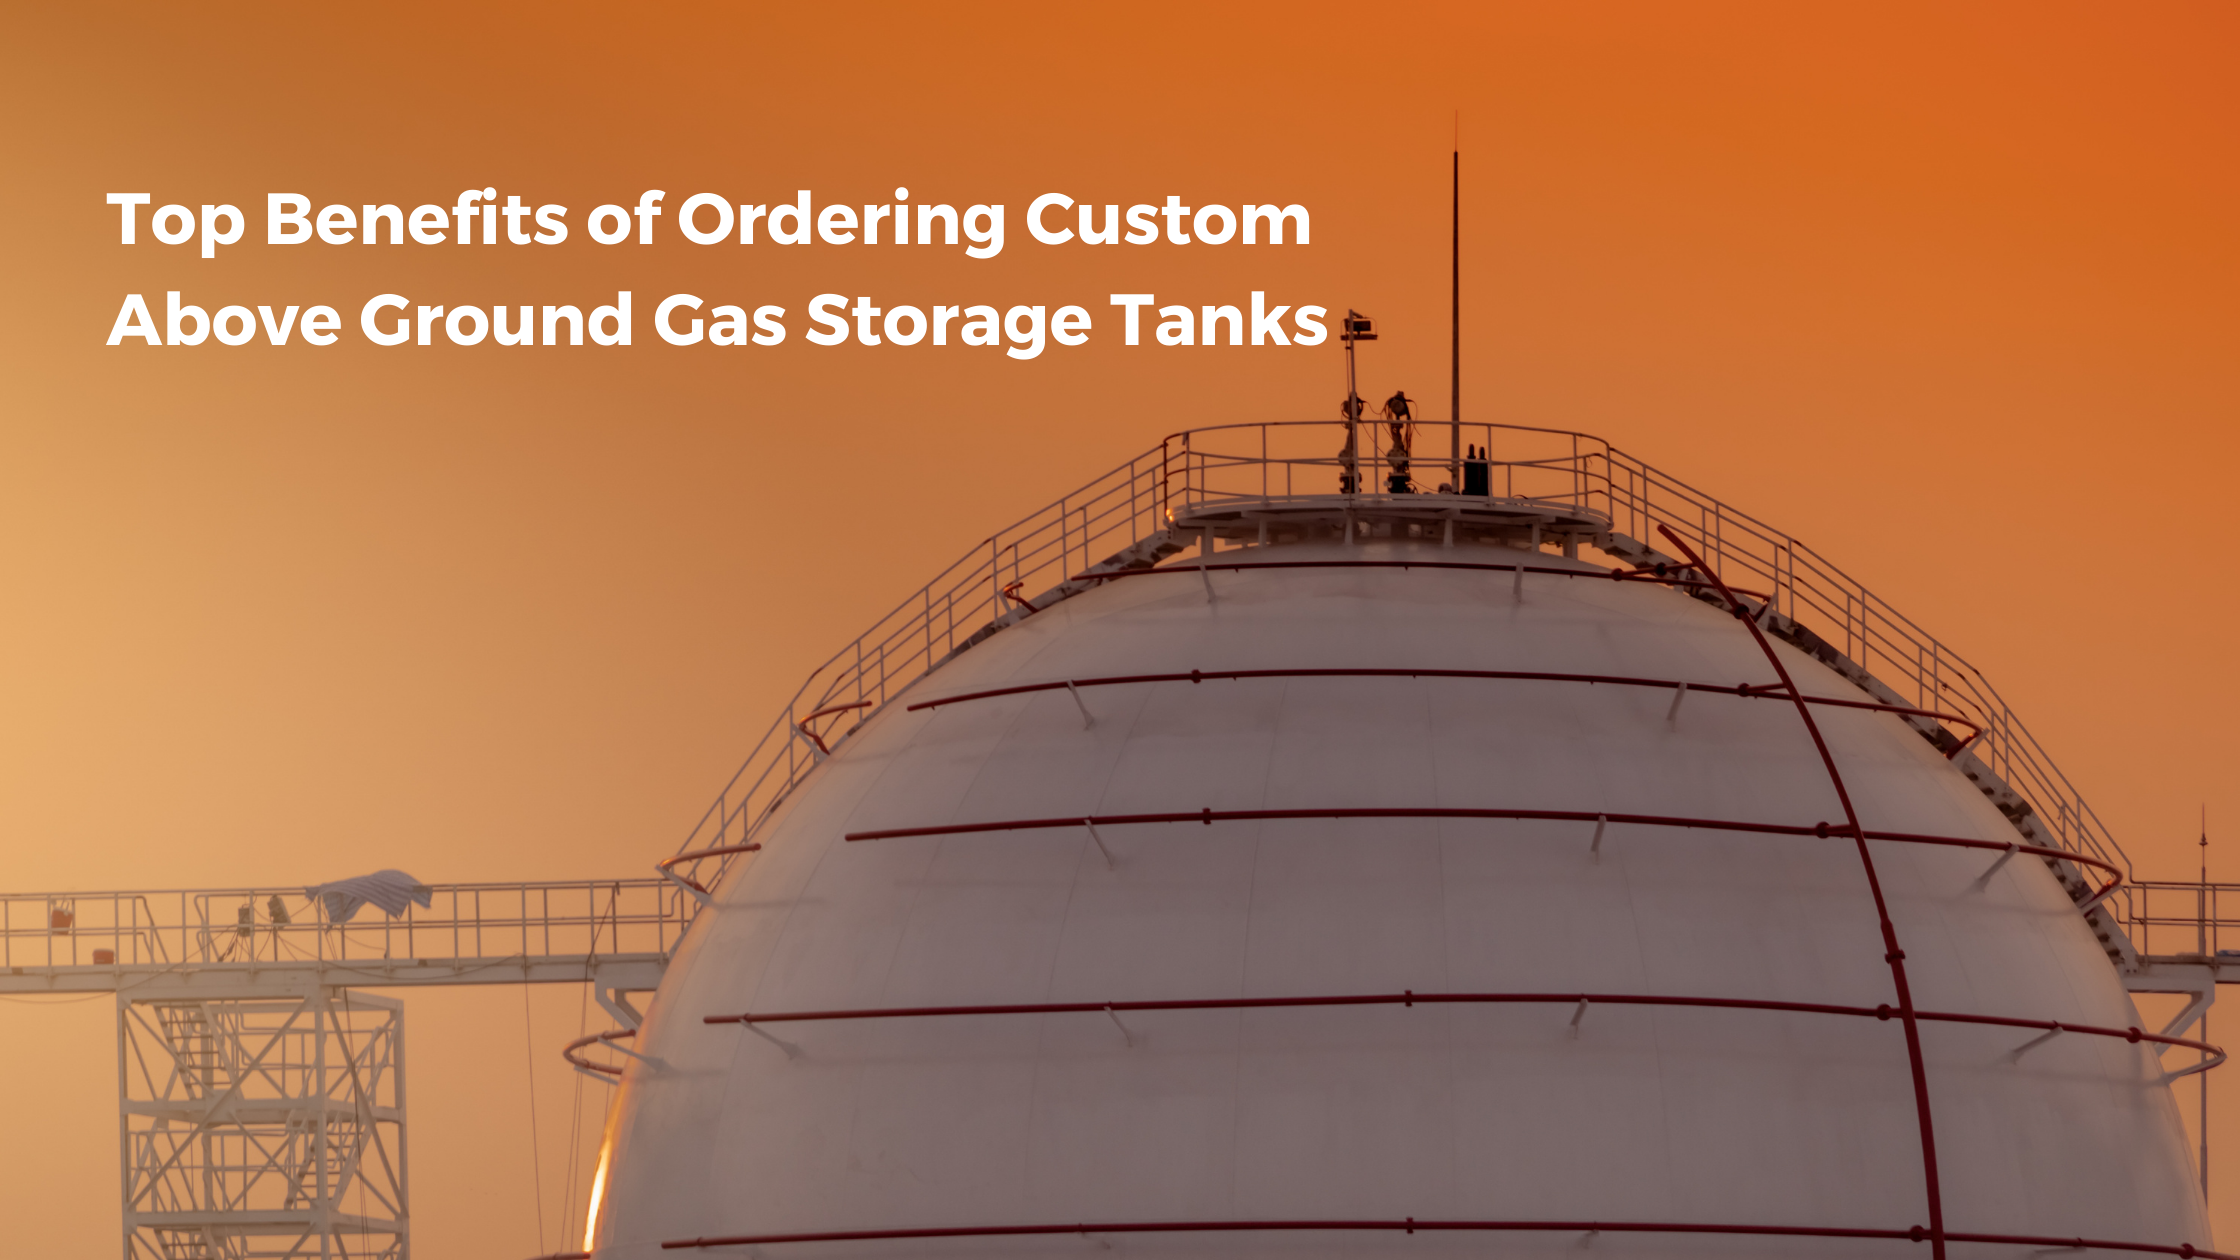 Top Benefits of Ordering Custom Above Ground Gas Storage Tanks